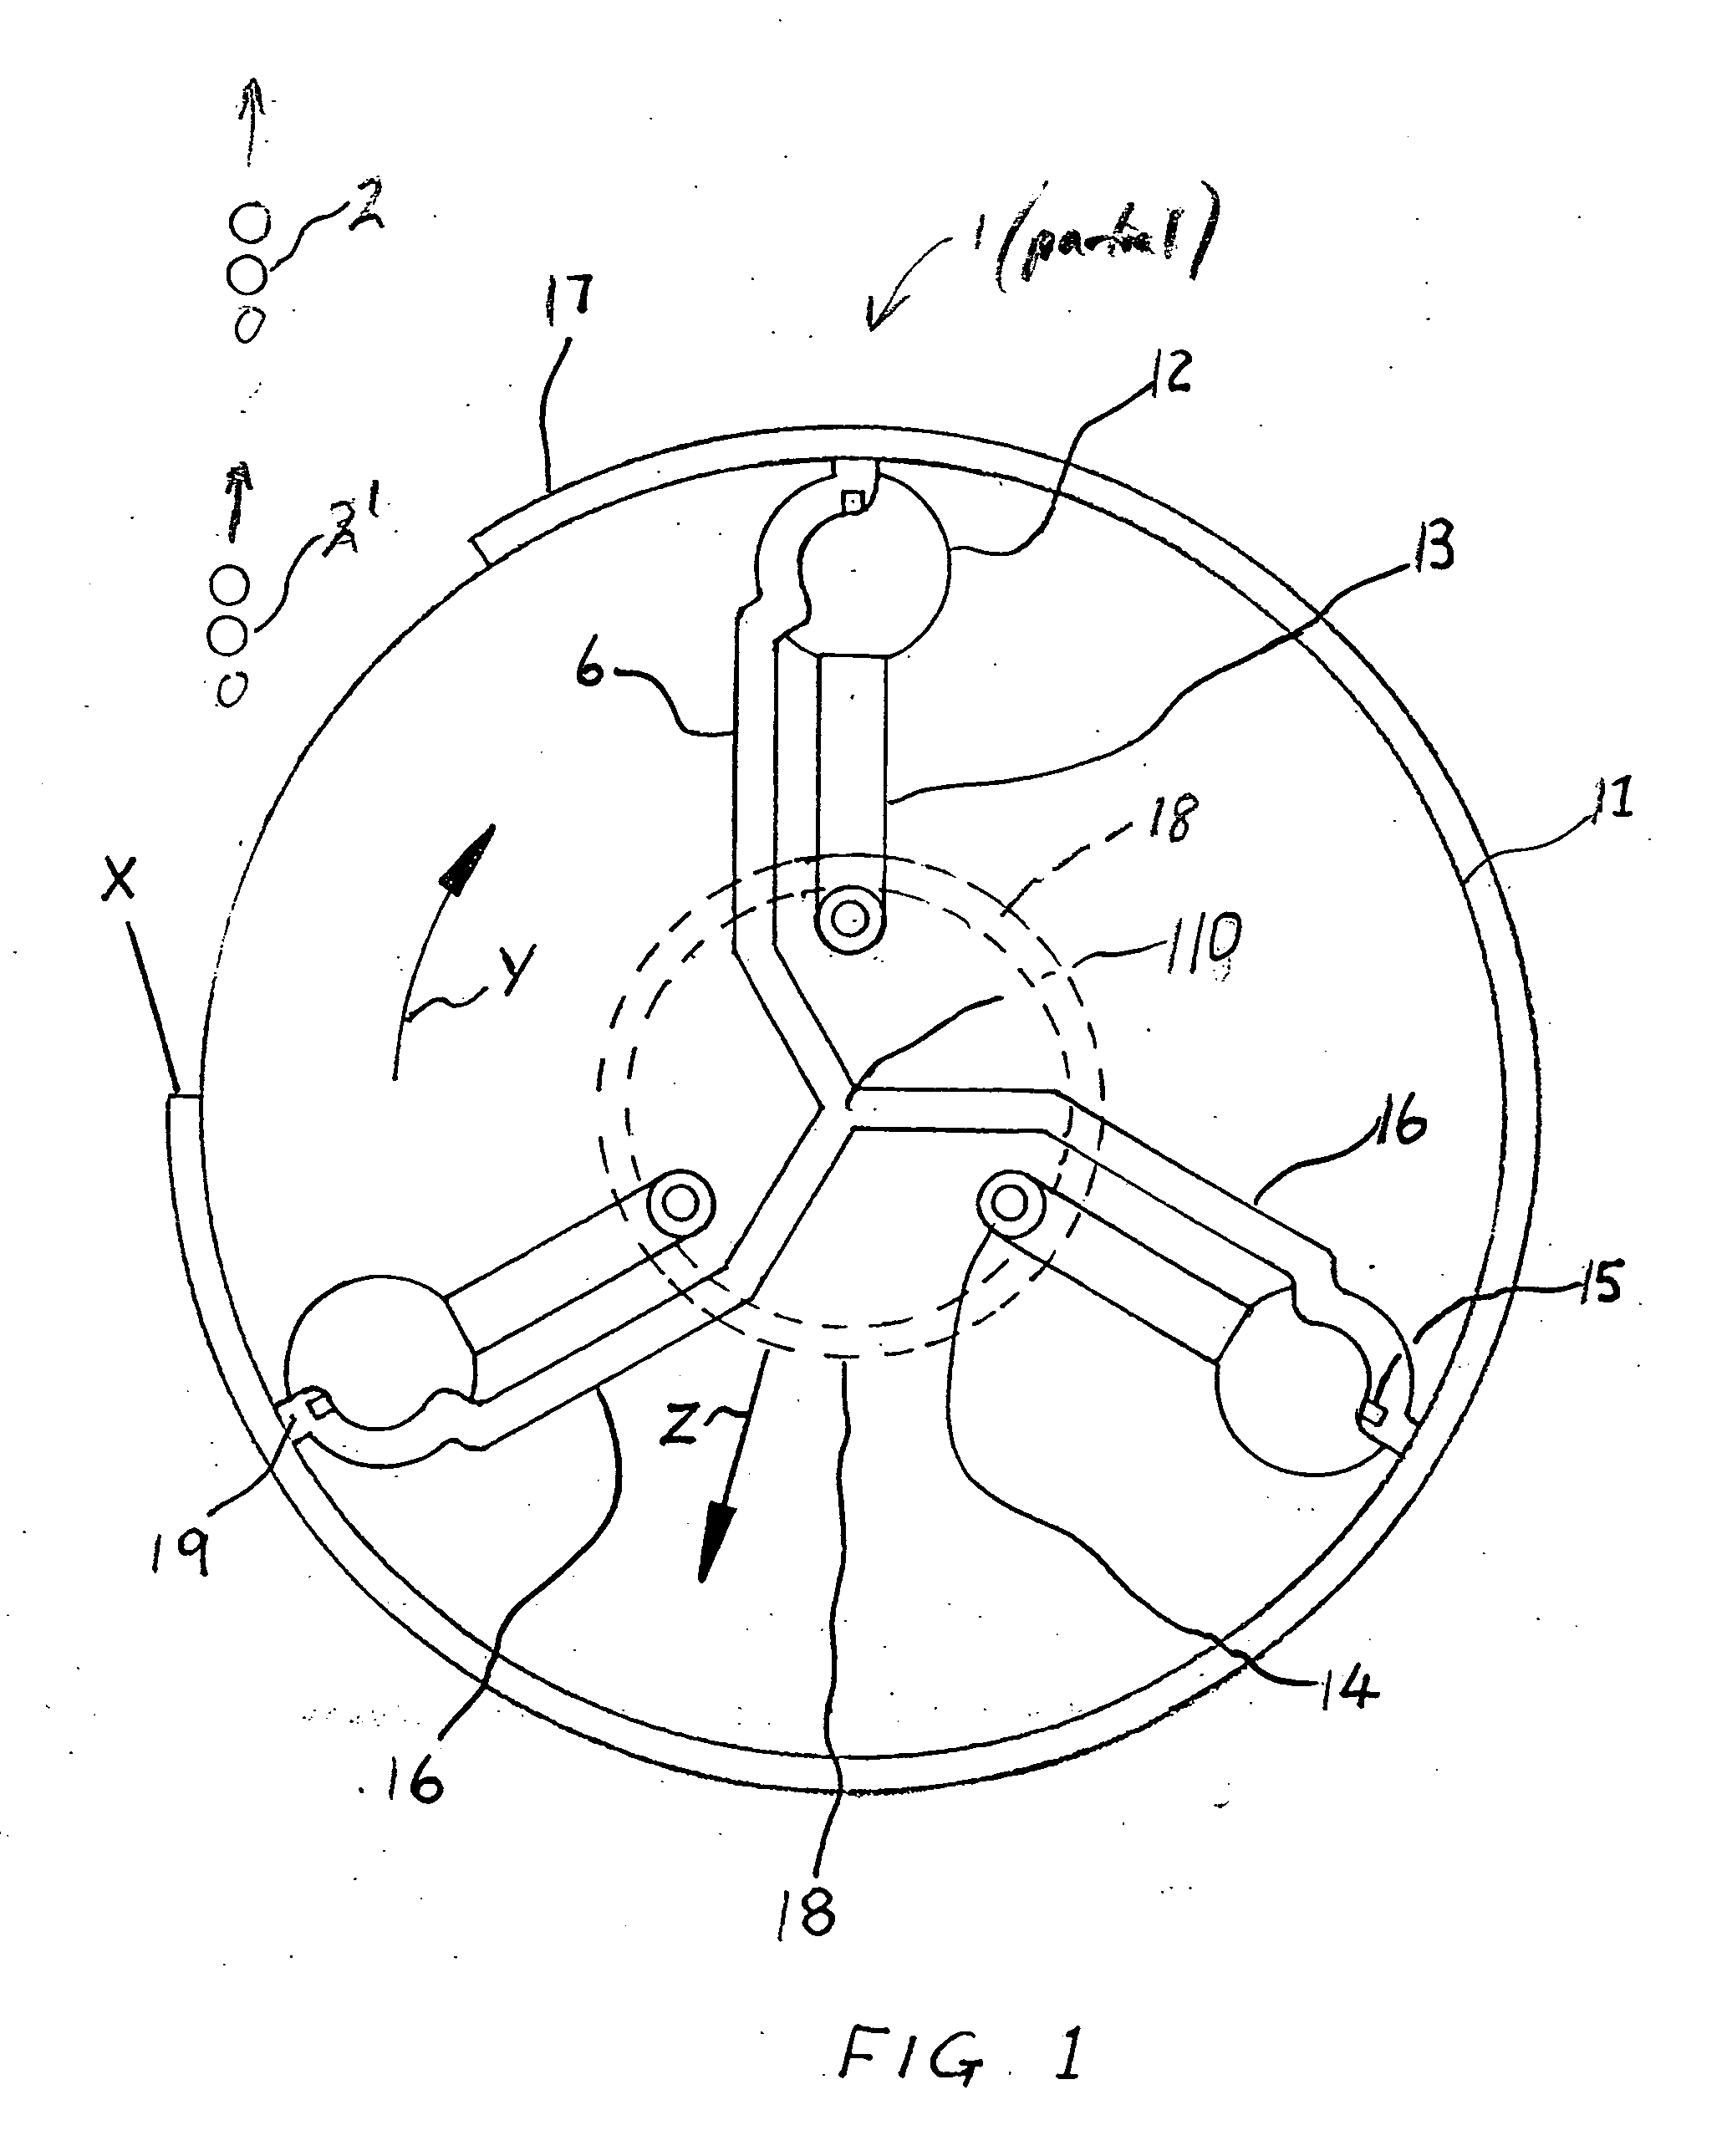 Low-mass-trigger controlled release of projectiles having variable energies and numbers in a centrifugal propulsion weapon, and methods of weapon use